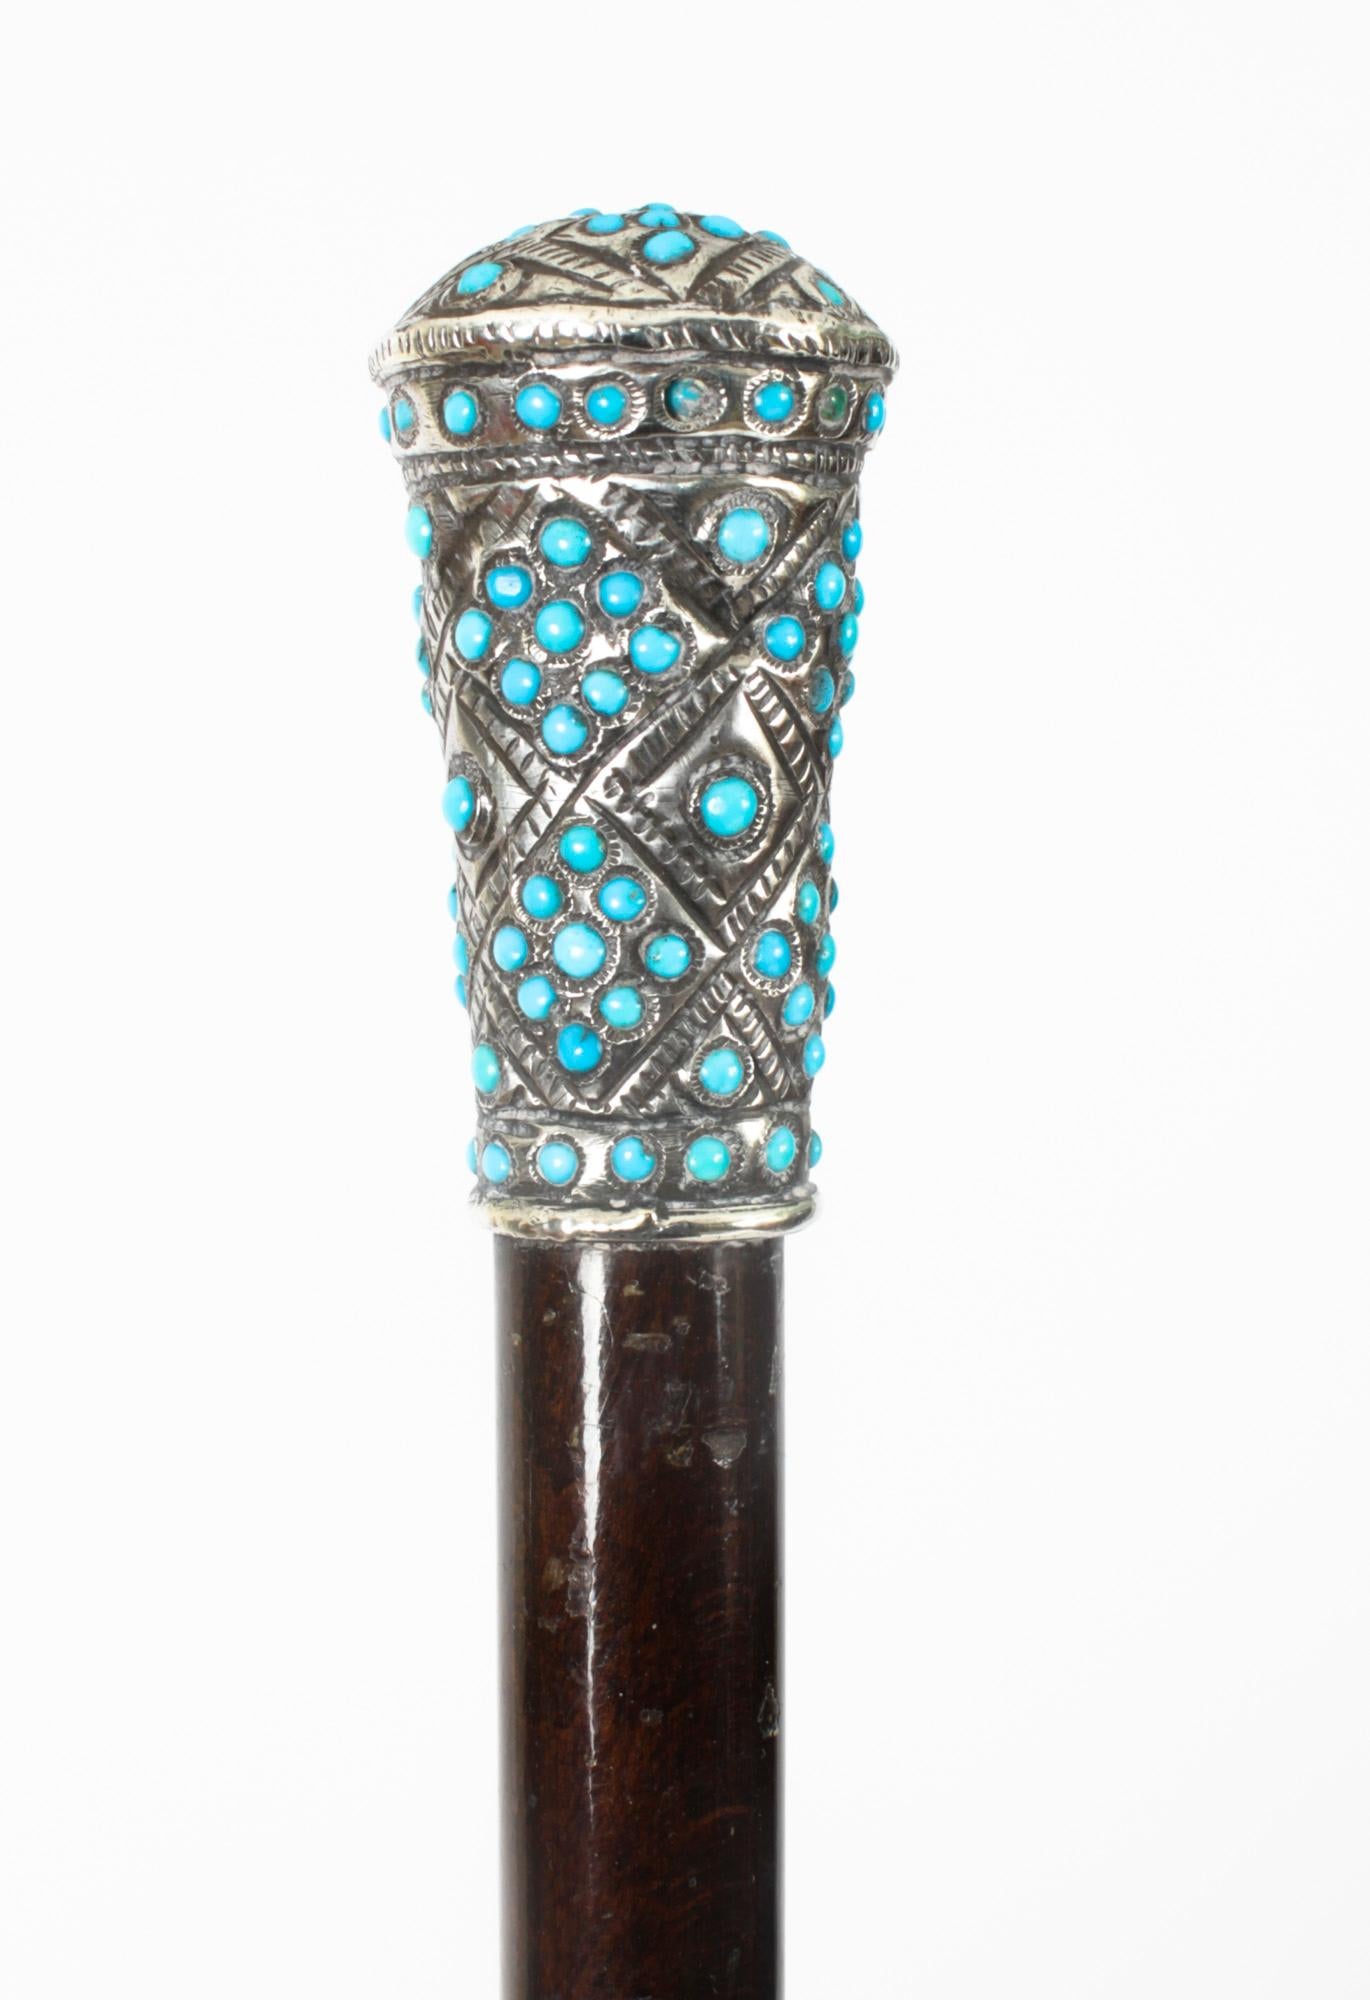 This is a fantastic antique French silver and turquoise handled walking stick, circa 1880 in date.

It has a stunning silver handle which has been beautifully decorated with turquoise stones on a sturdy Malacca tapering shaft which comes complete